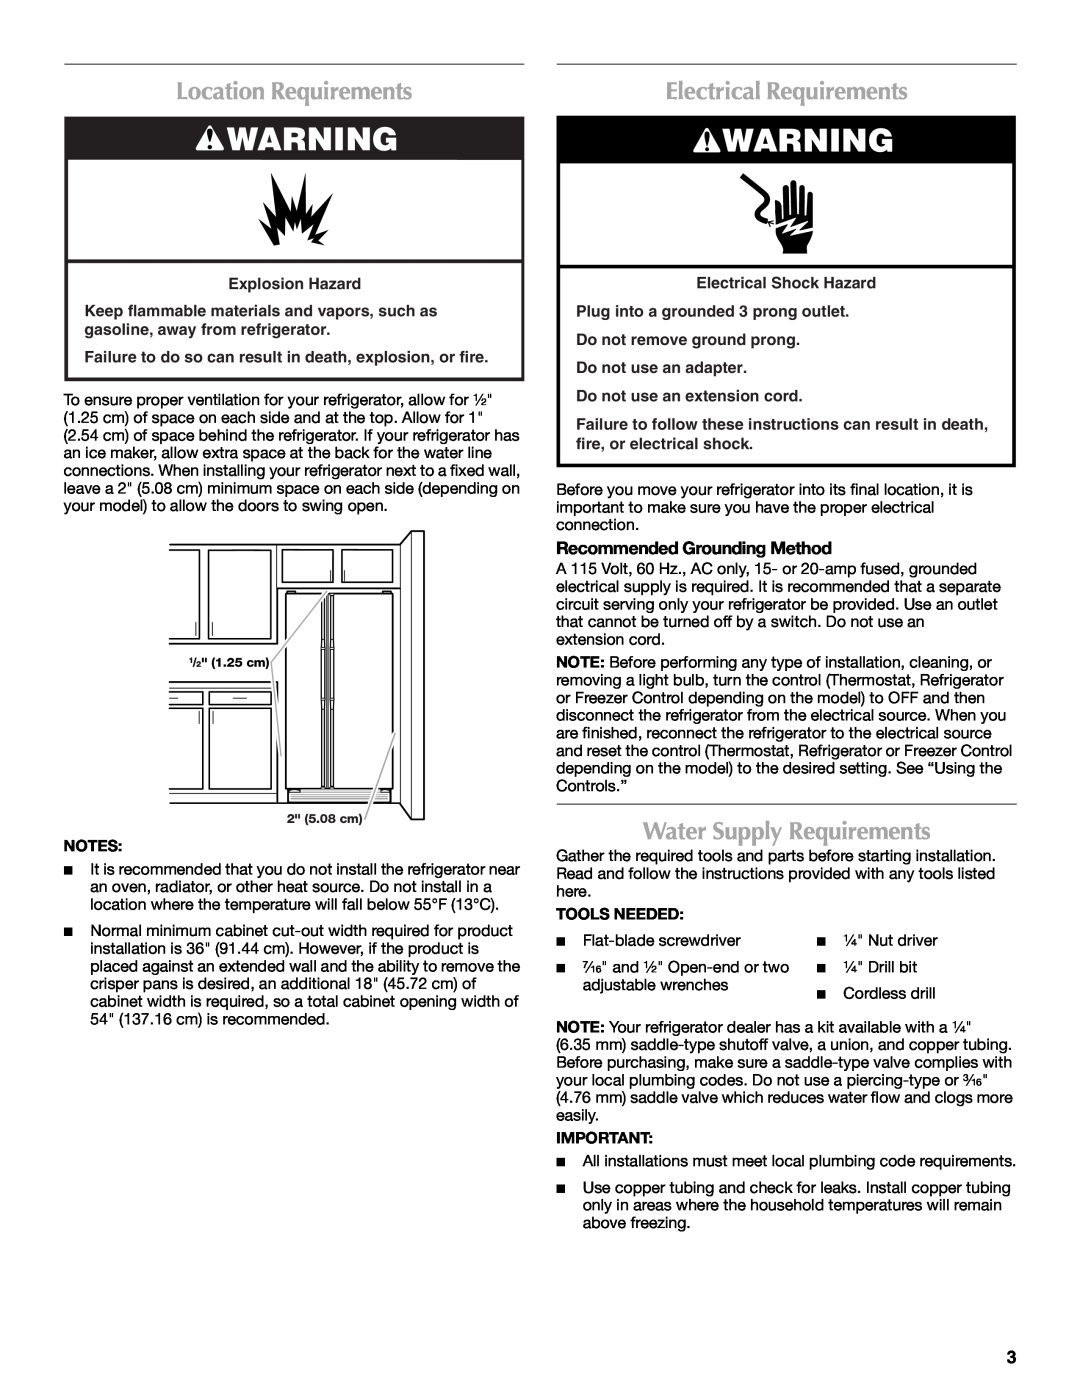 Maytag MSD2559XEW Location Requirements, Electrical Requirements, Water Supply Requirements, Recommended Grounding Method 